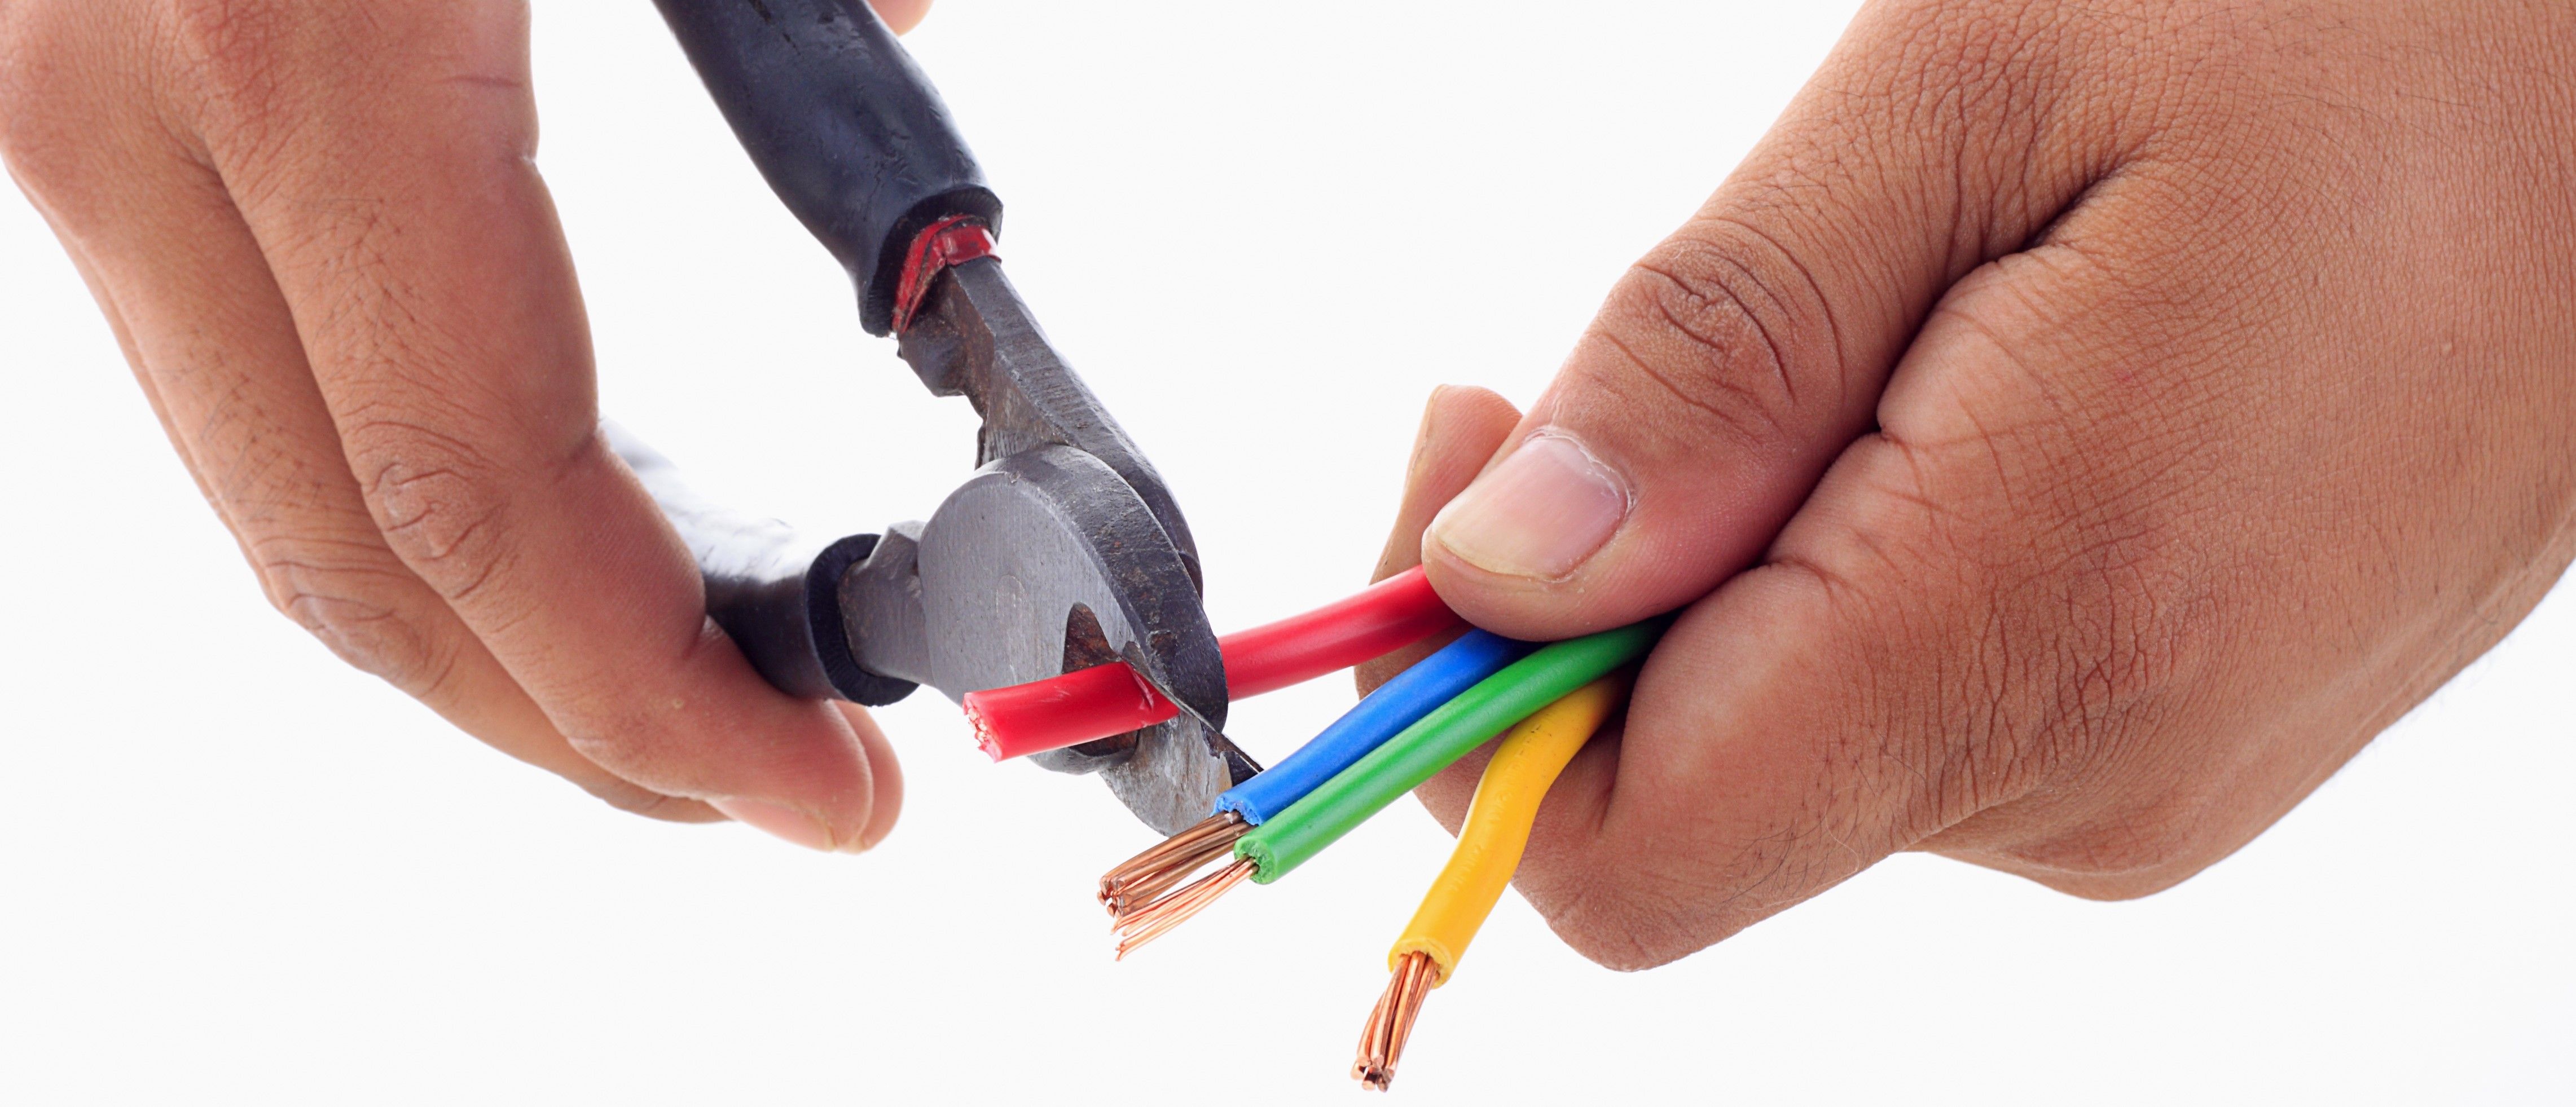 Cutting Electrical Wire With Wire Cutter